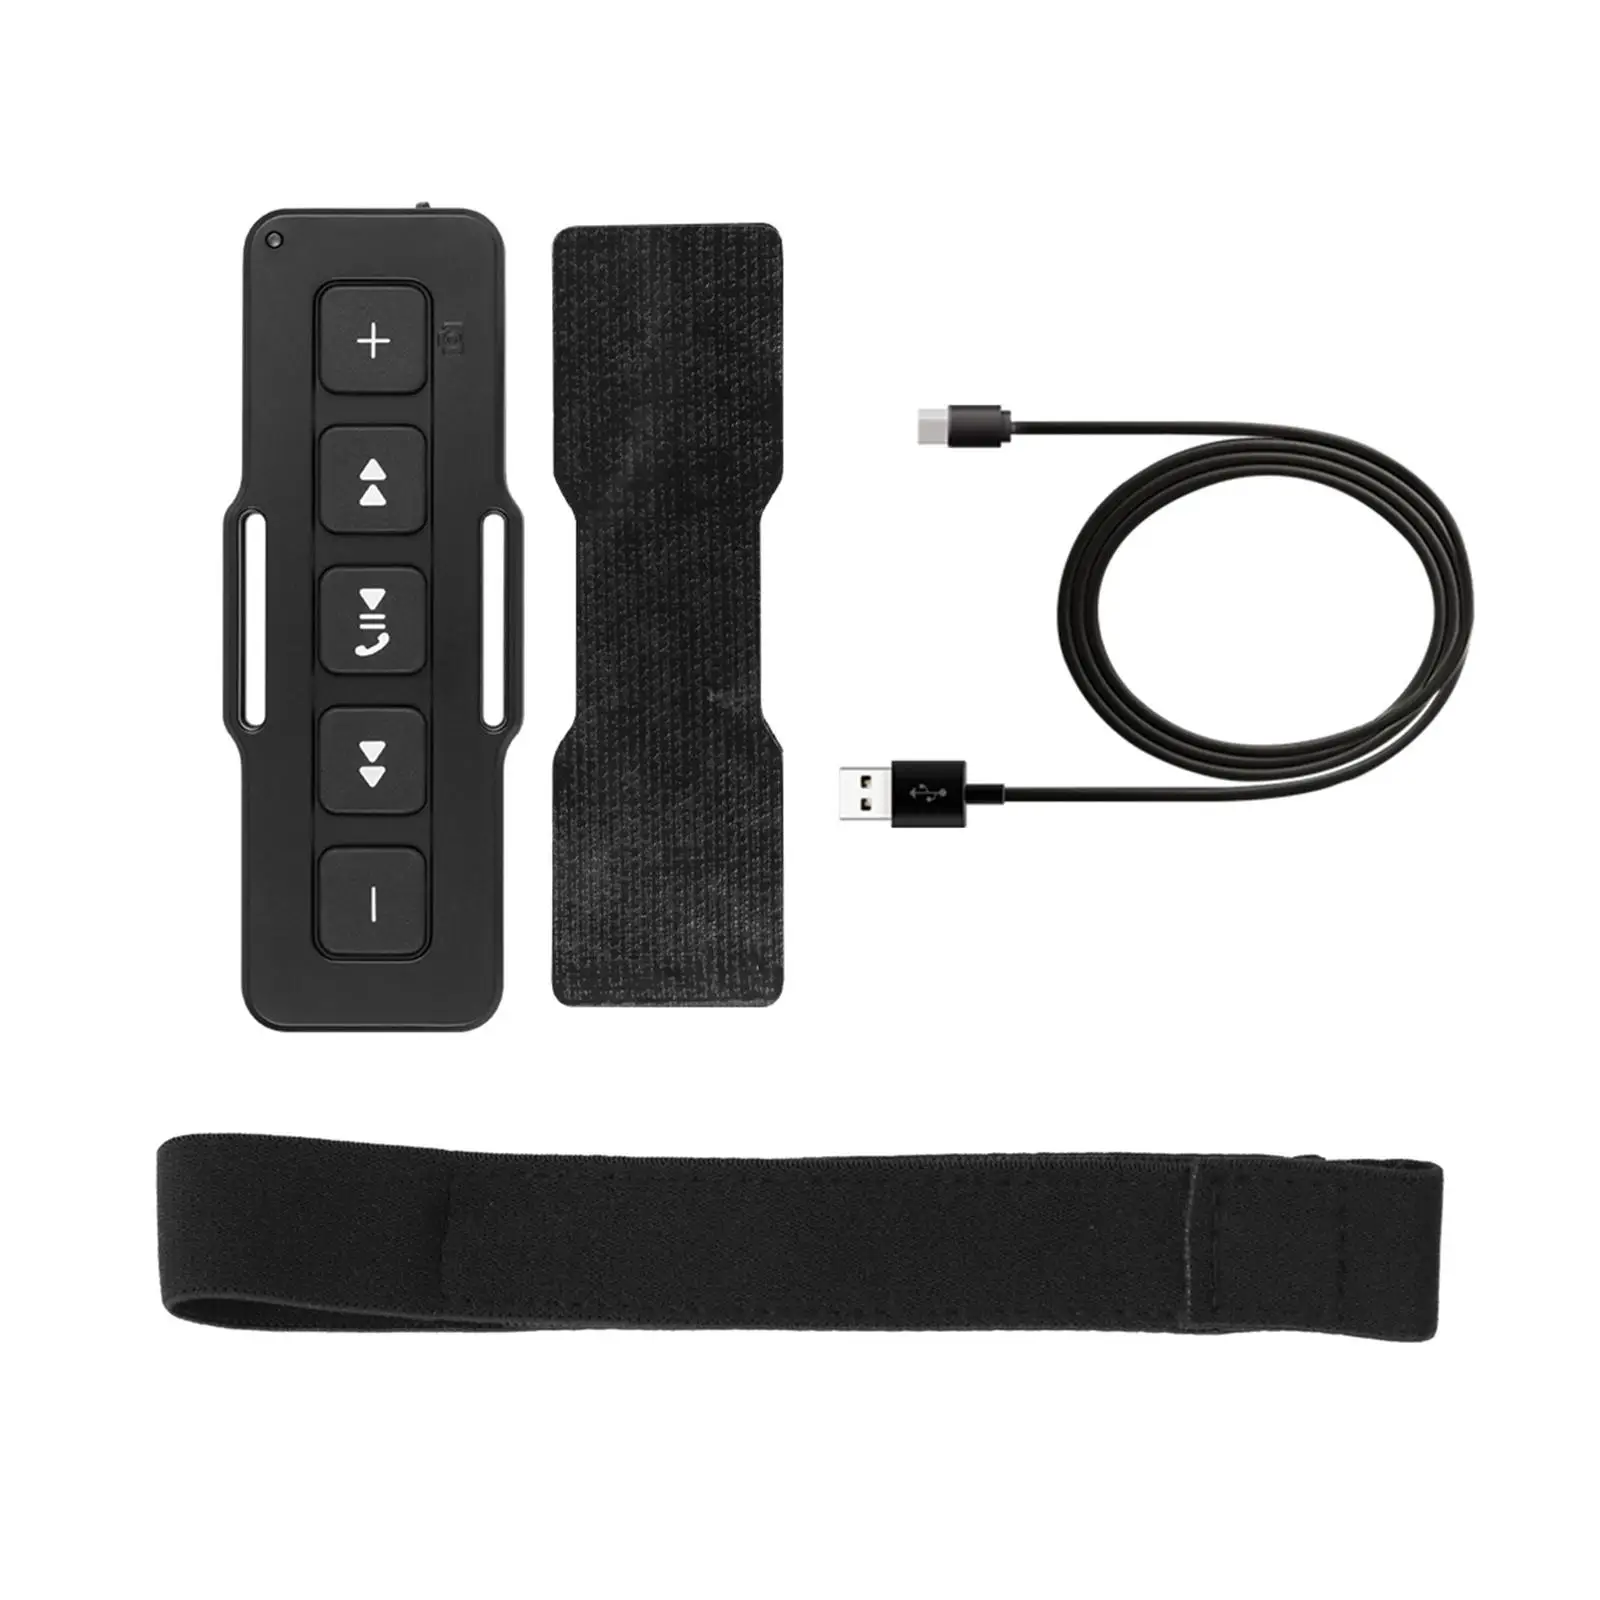 Car Remote Controller 5 Button Waterproof Media Control for Hiking Car